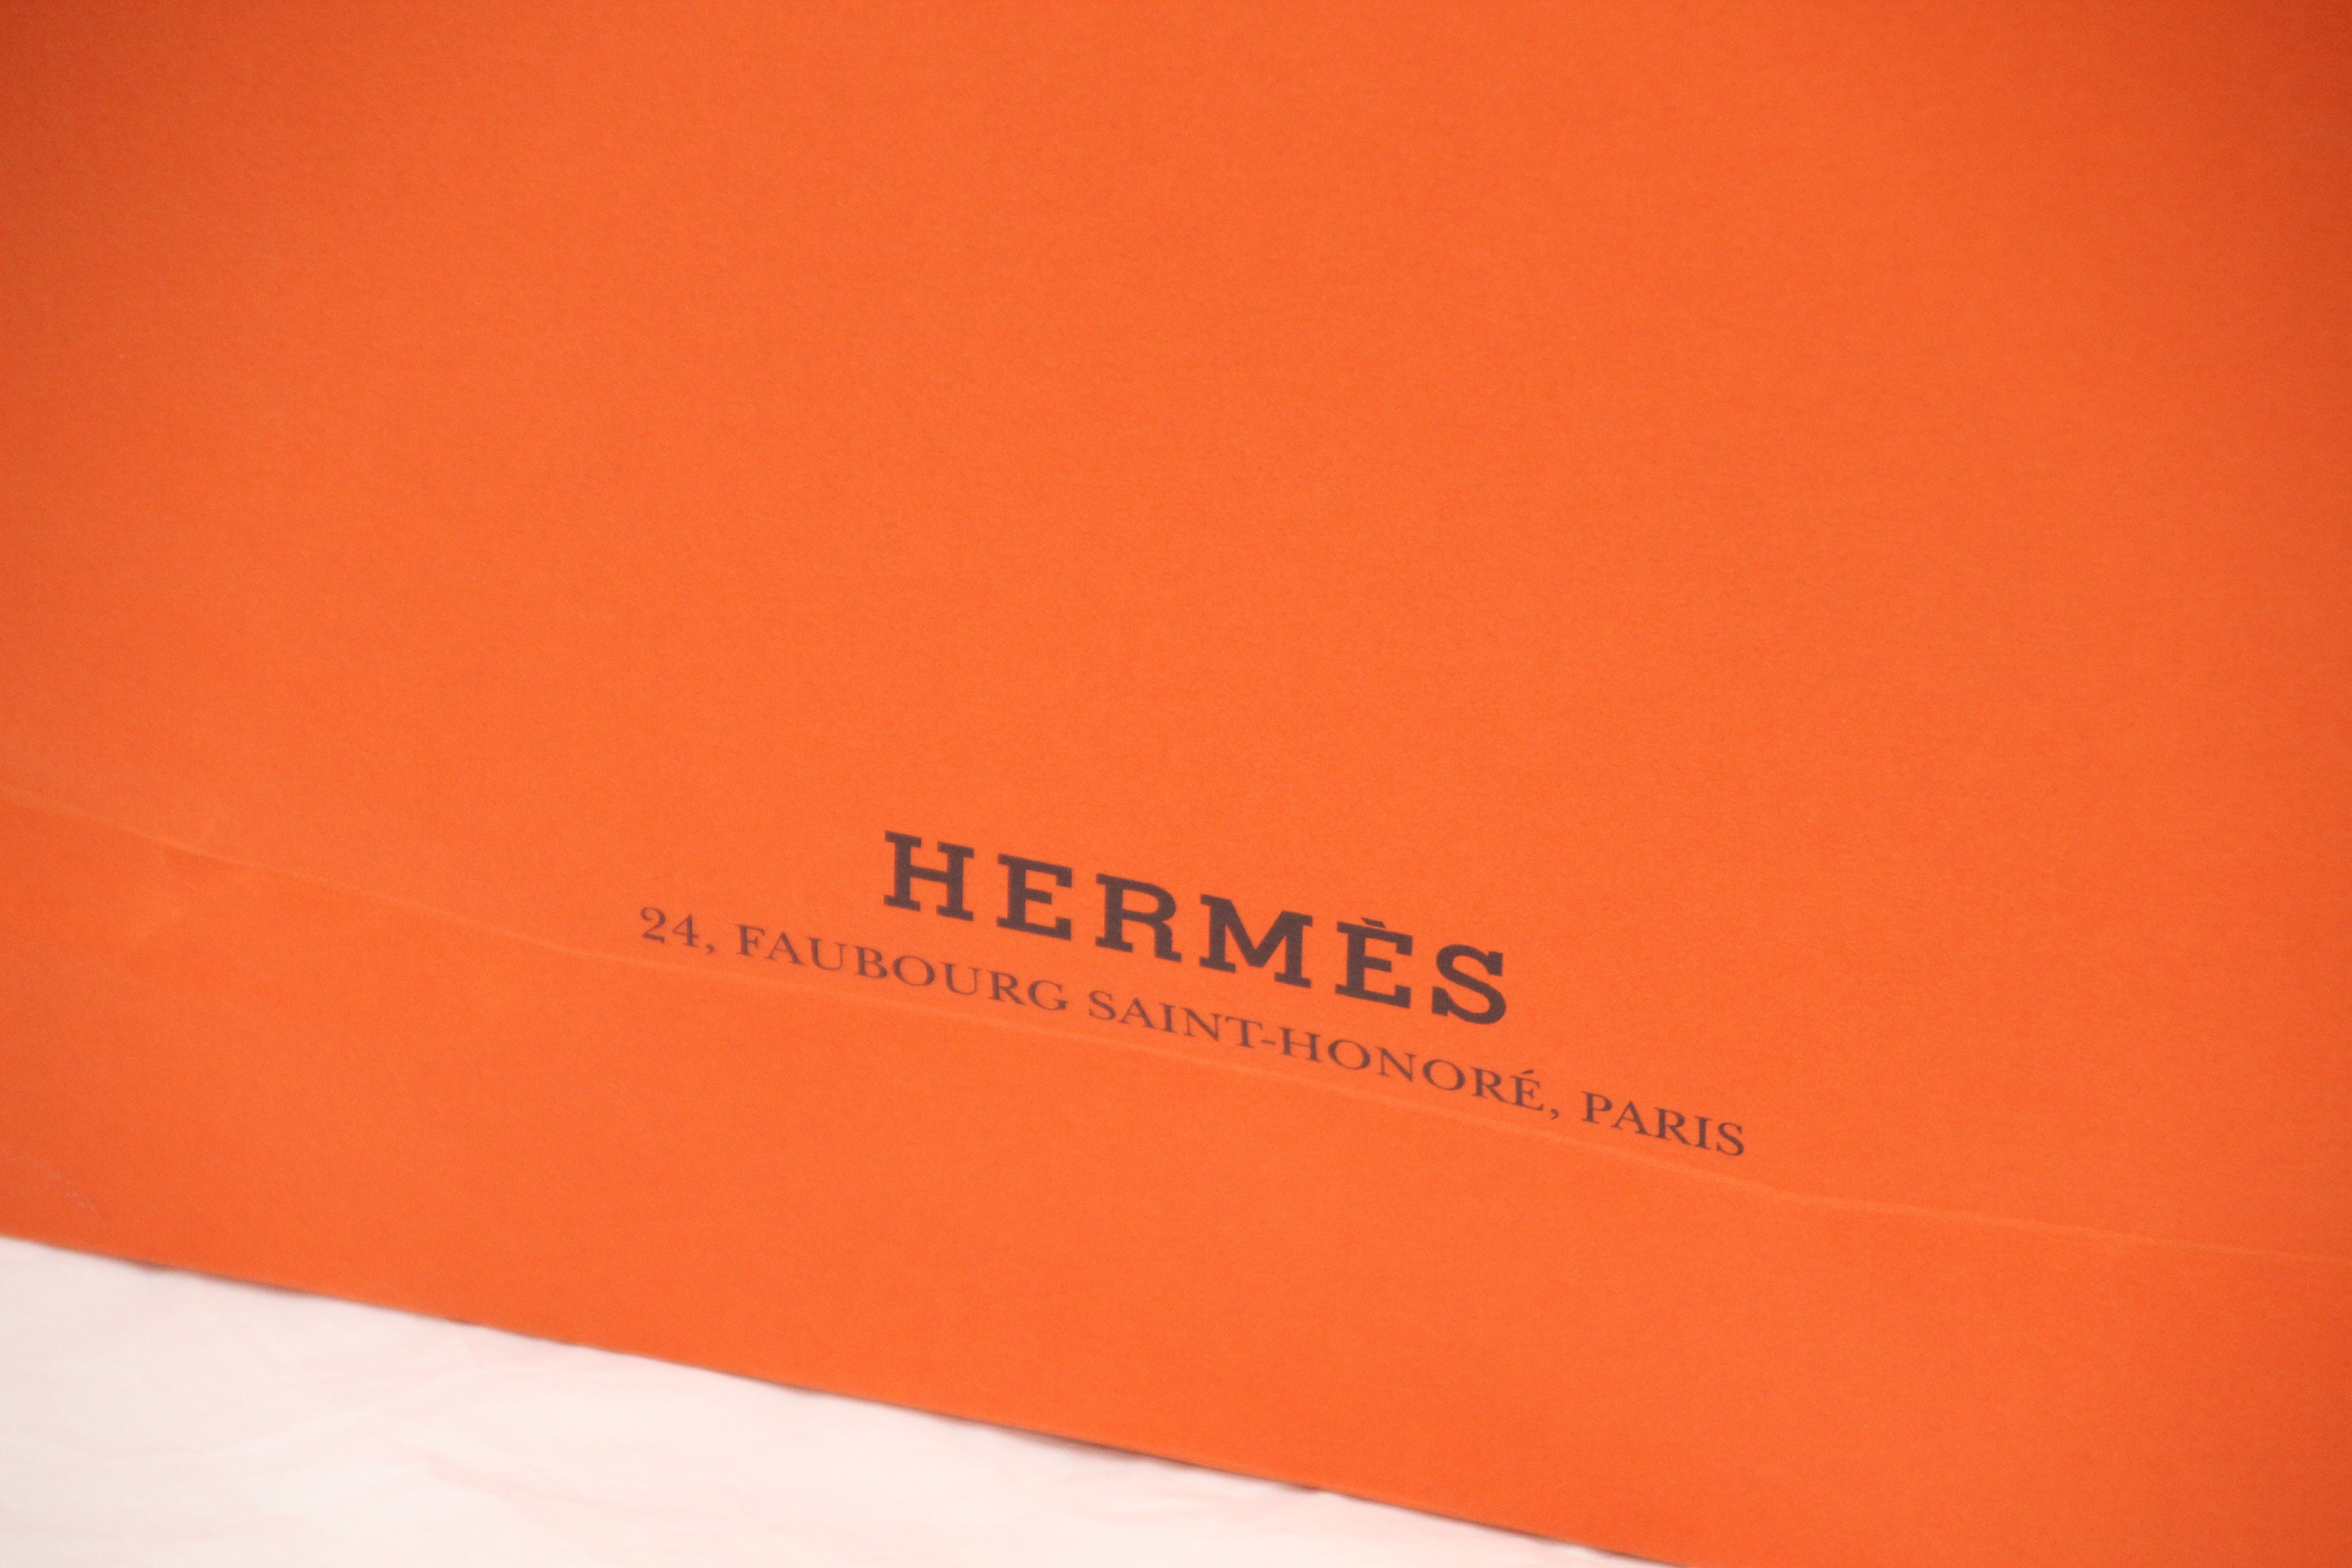 Orange Hermes bag Gift wrapping Elegant gift Gift for her Fashion gift Lady  accessories Orange paper bag Mother's day gift Orange accents